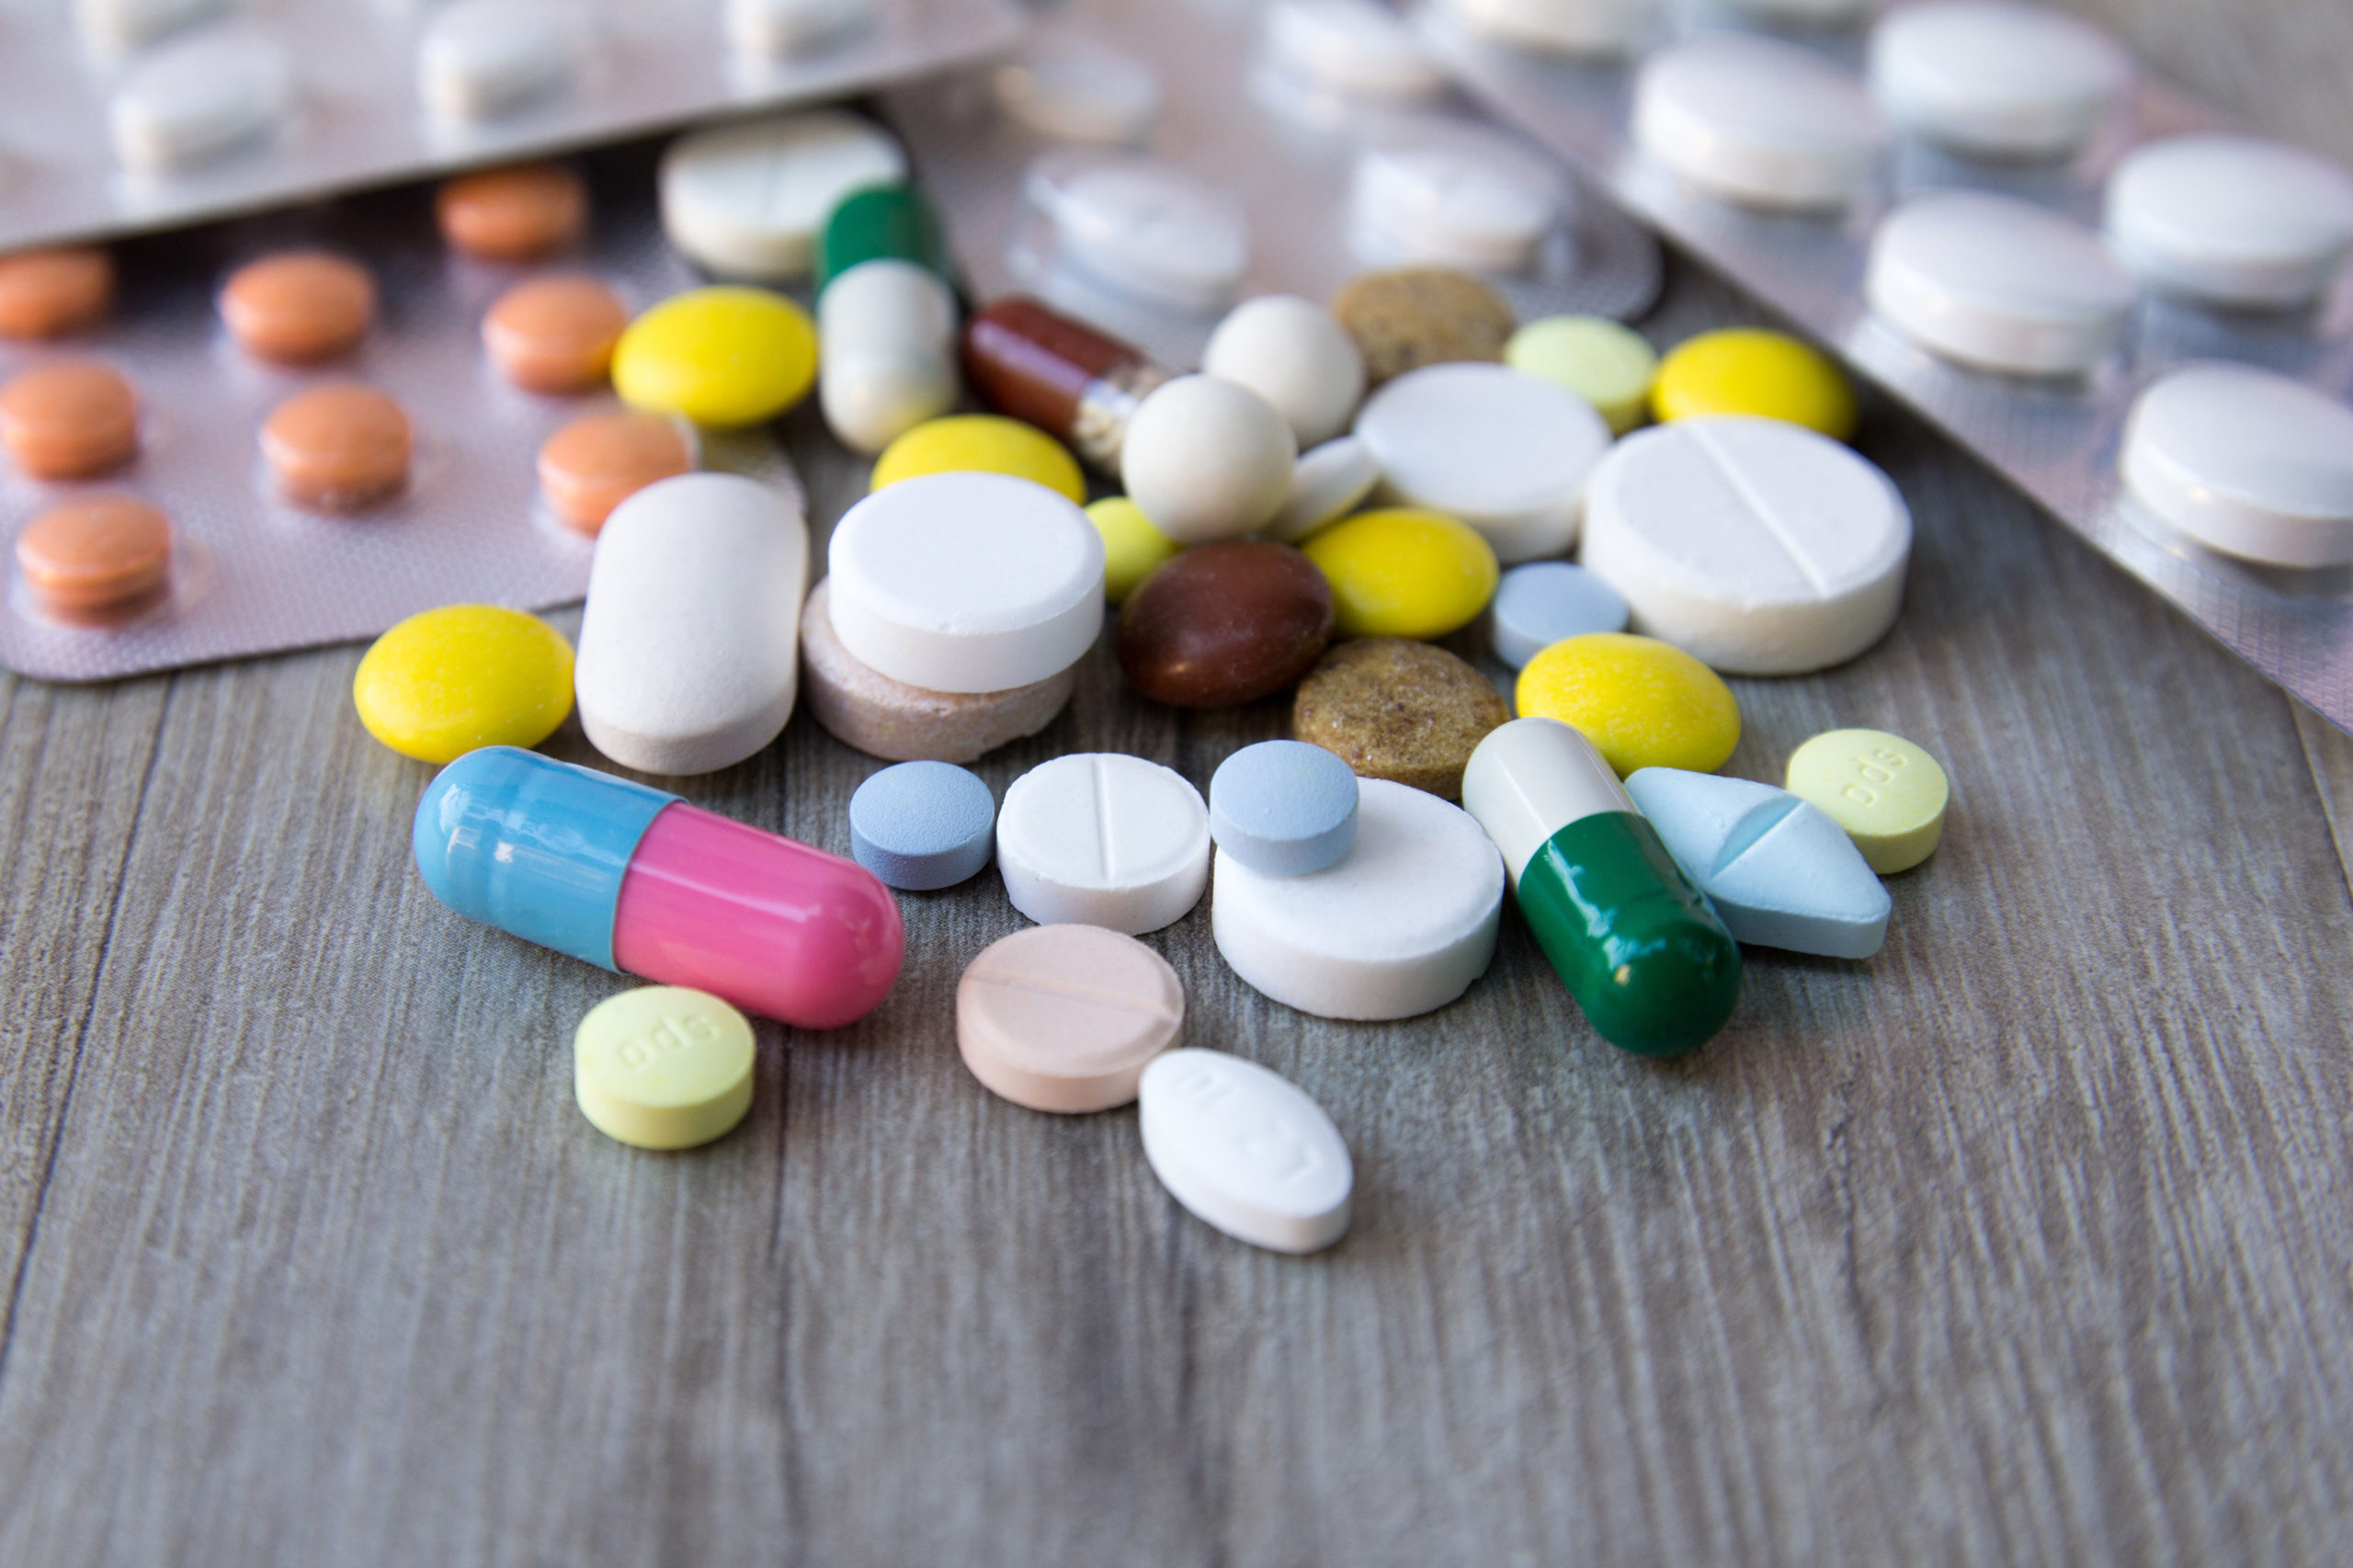 Why is Prescription Drug Use Common in the United States?